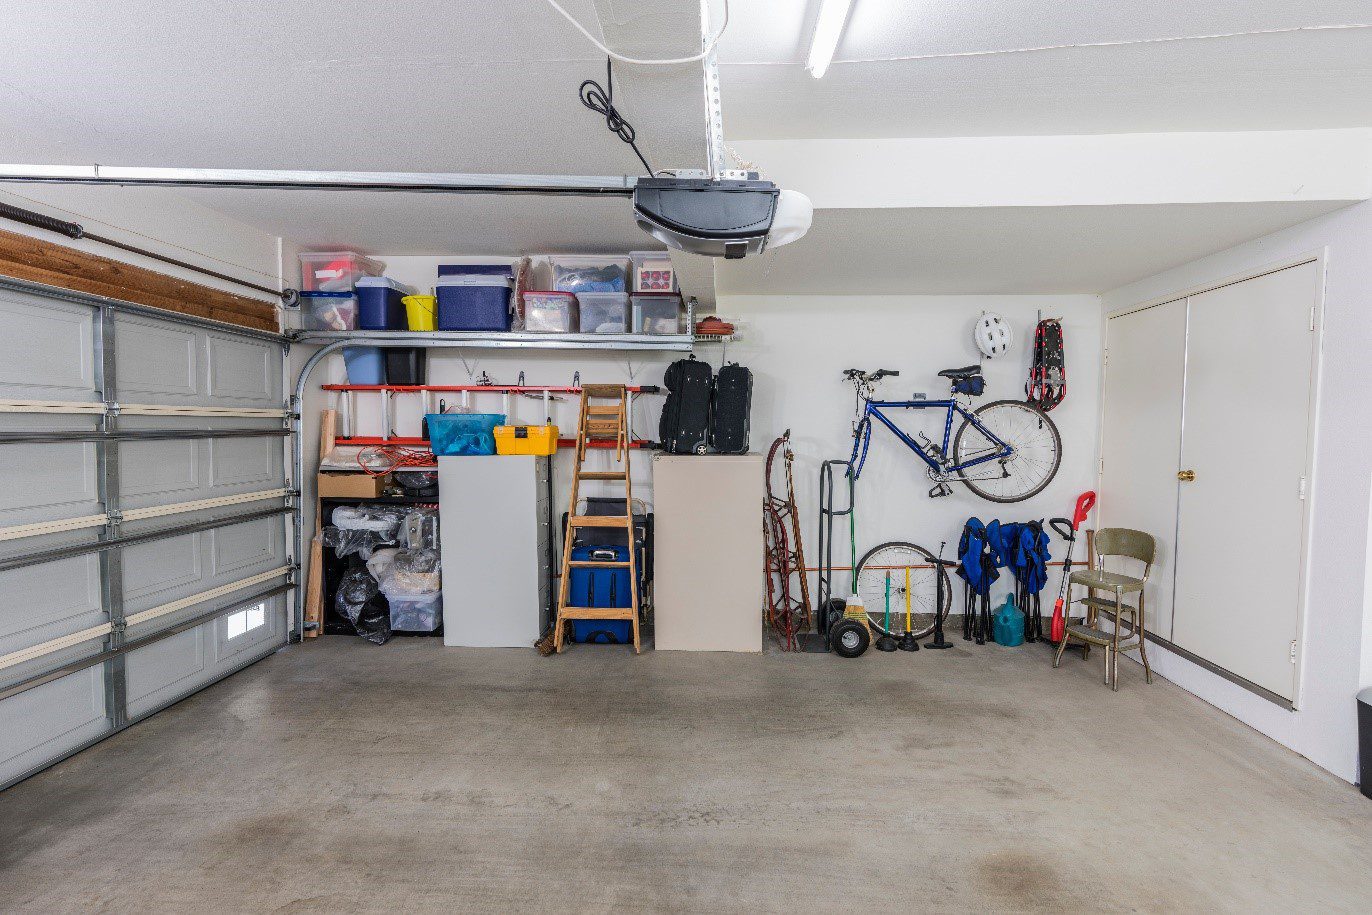 10 Cool Garage Ideas That Help You Make the Most out of Your Space